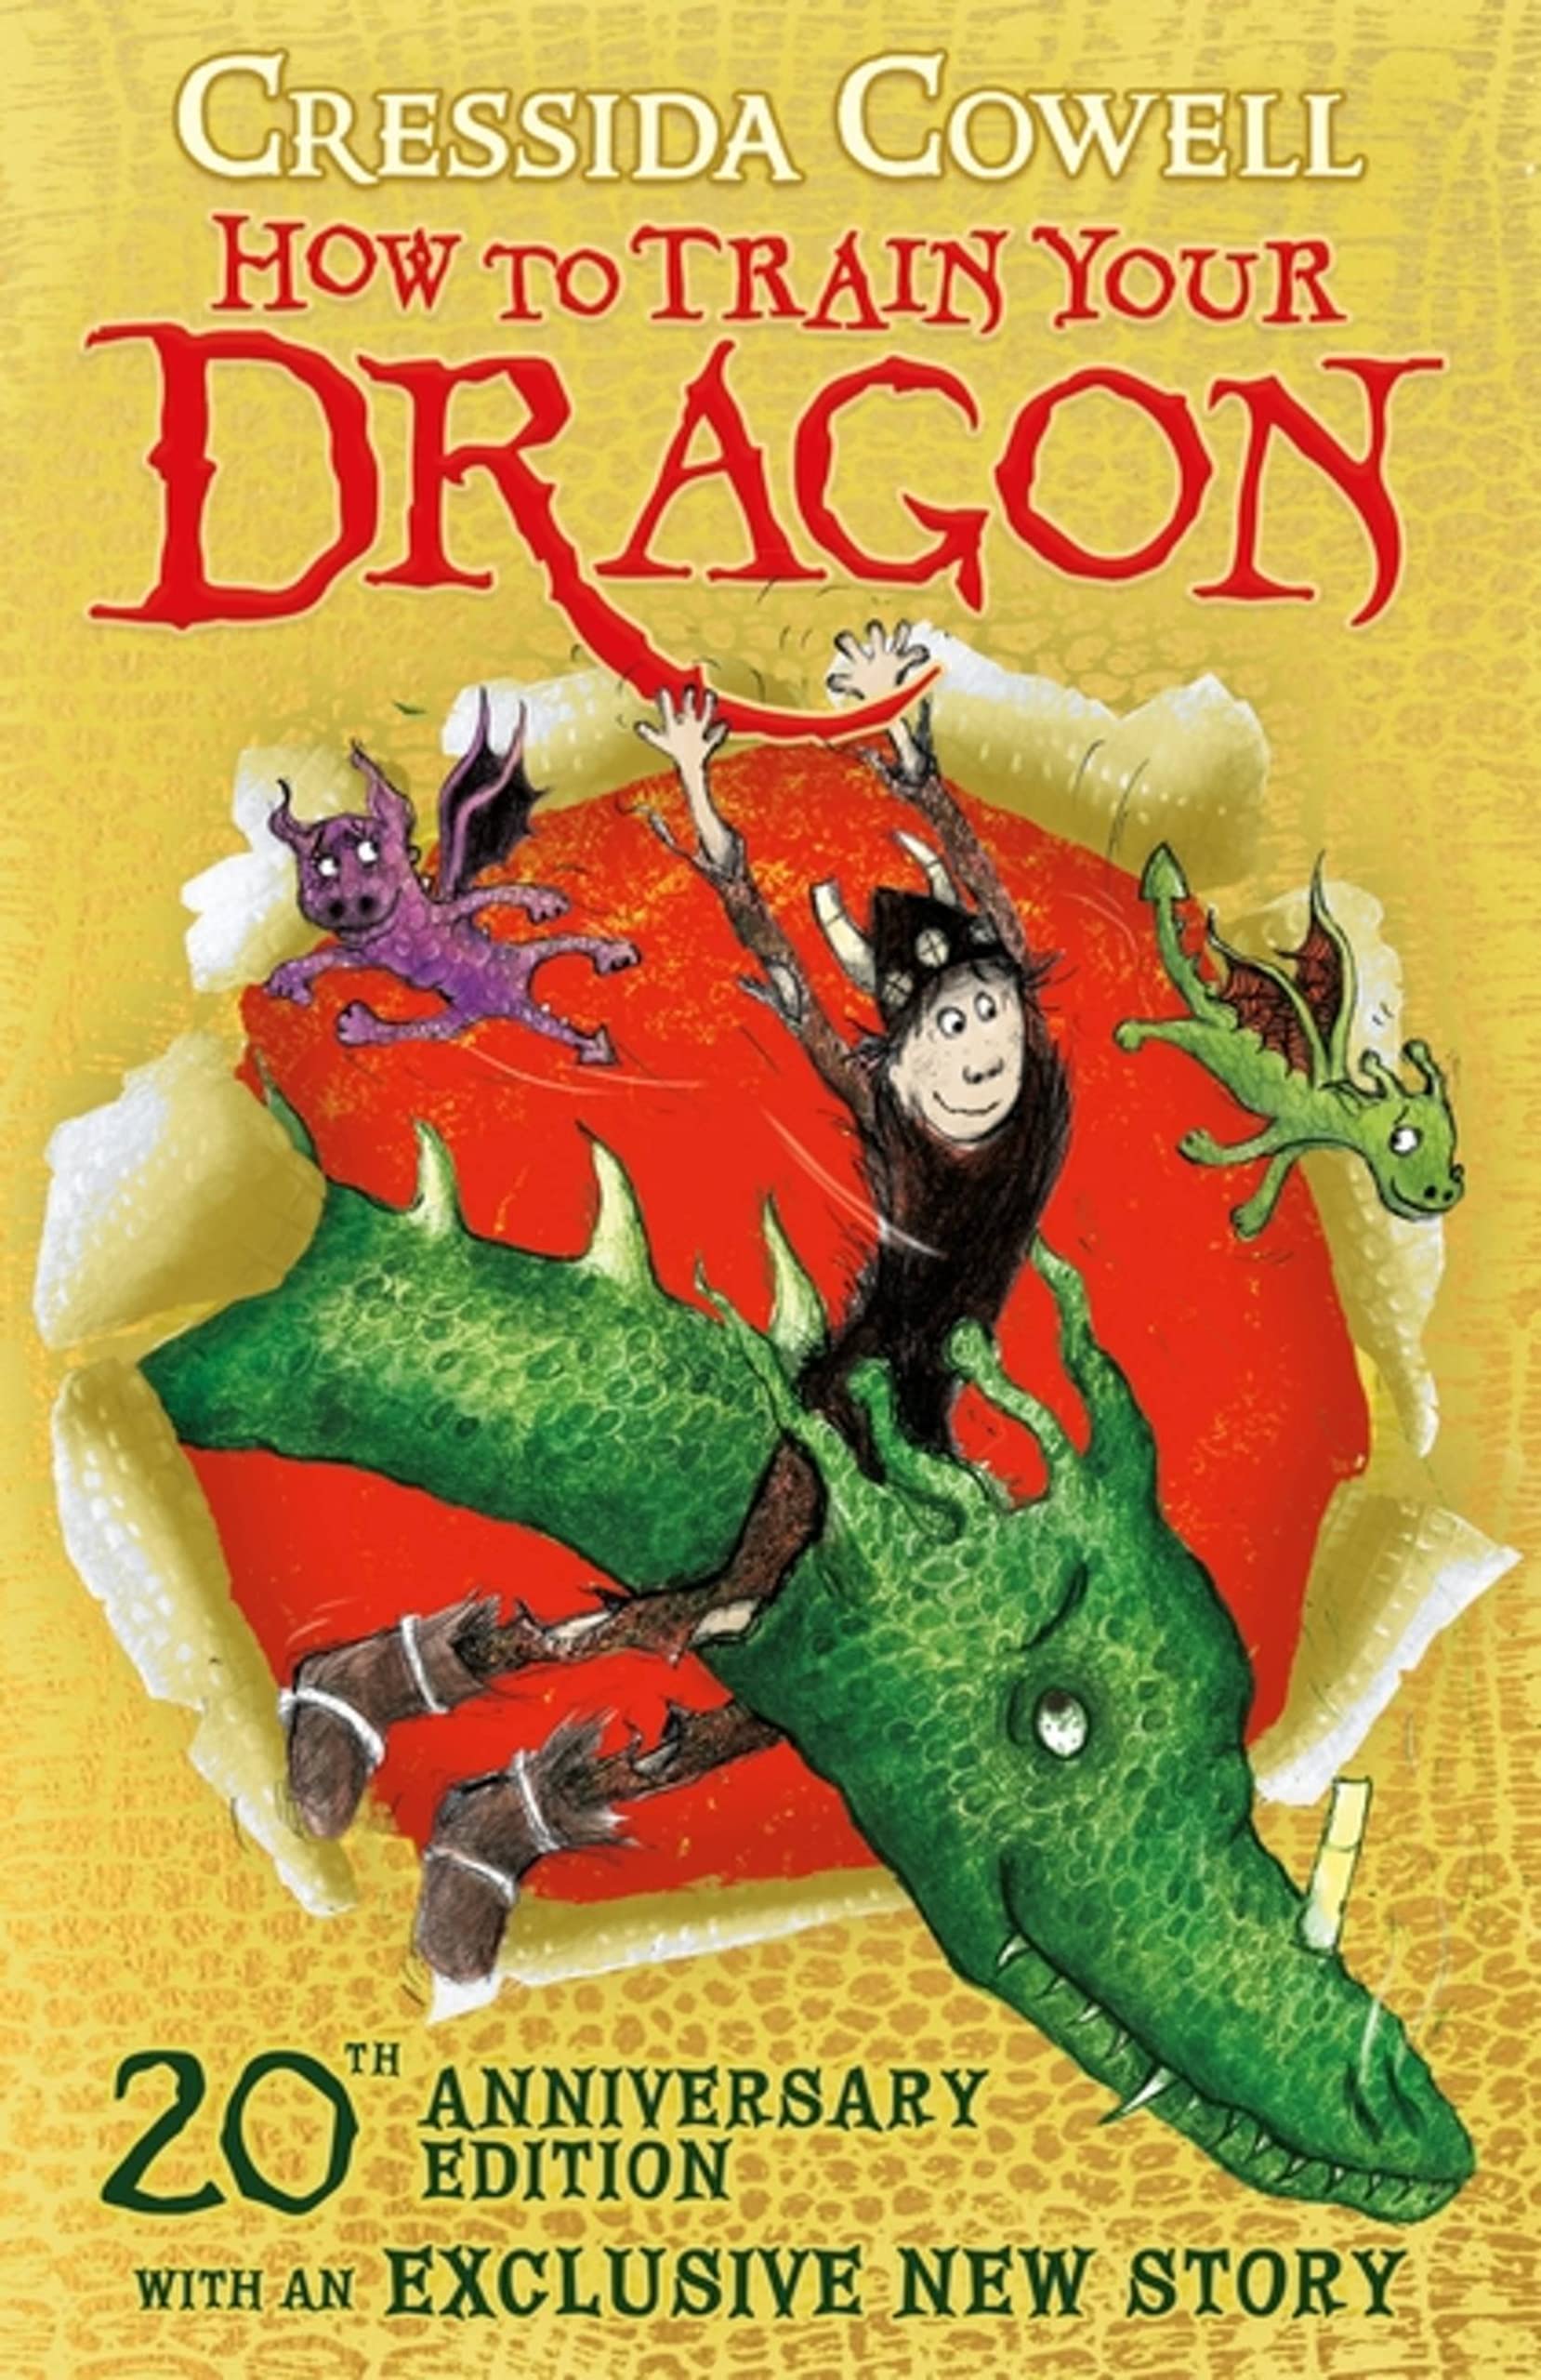 How to Train Your Dragon | Cressida Cowell